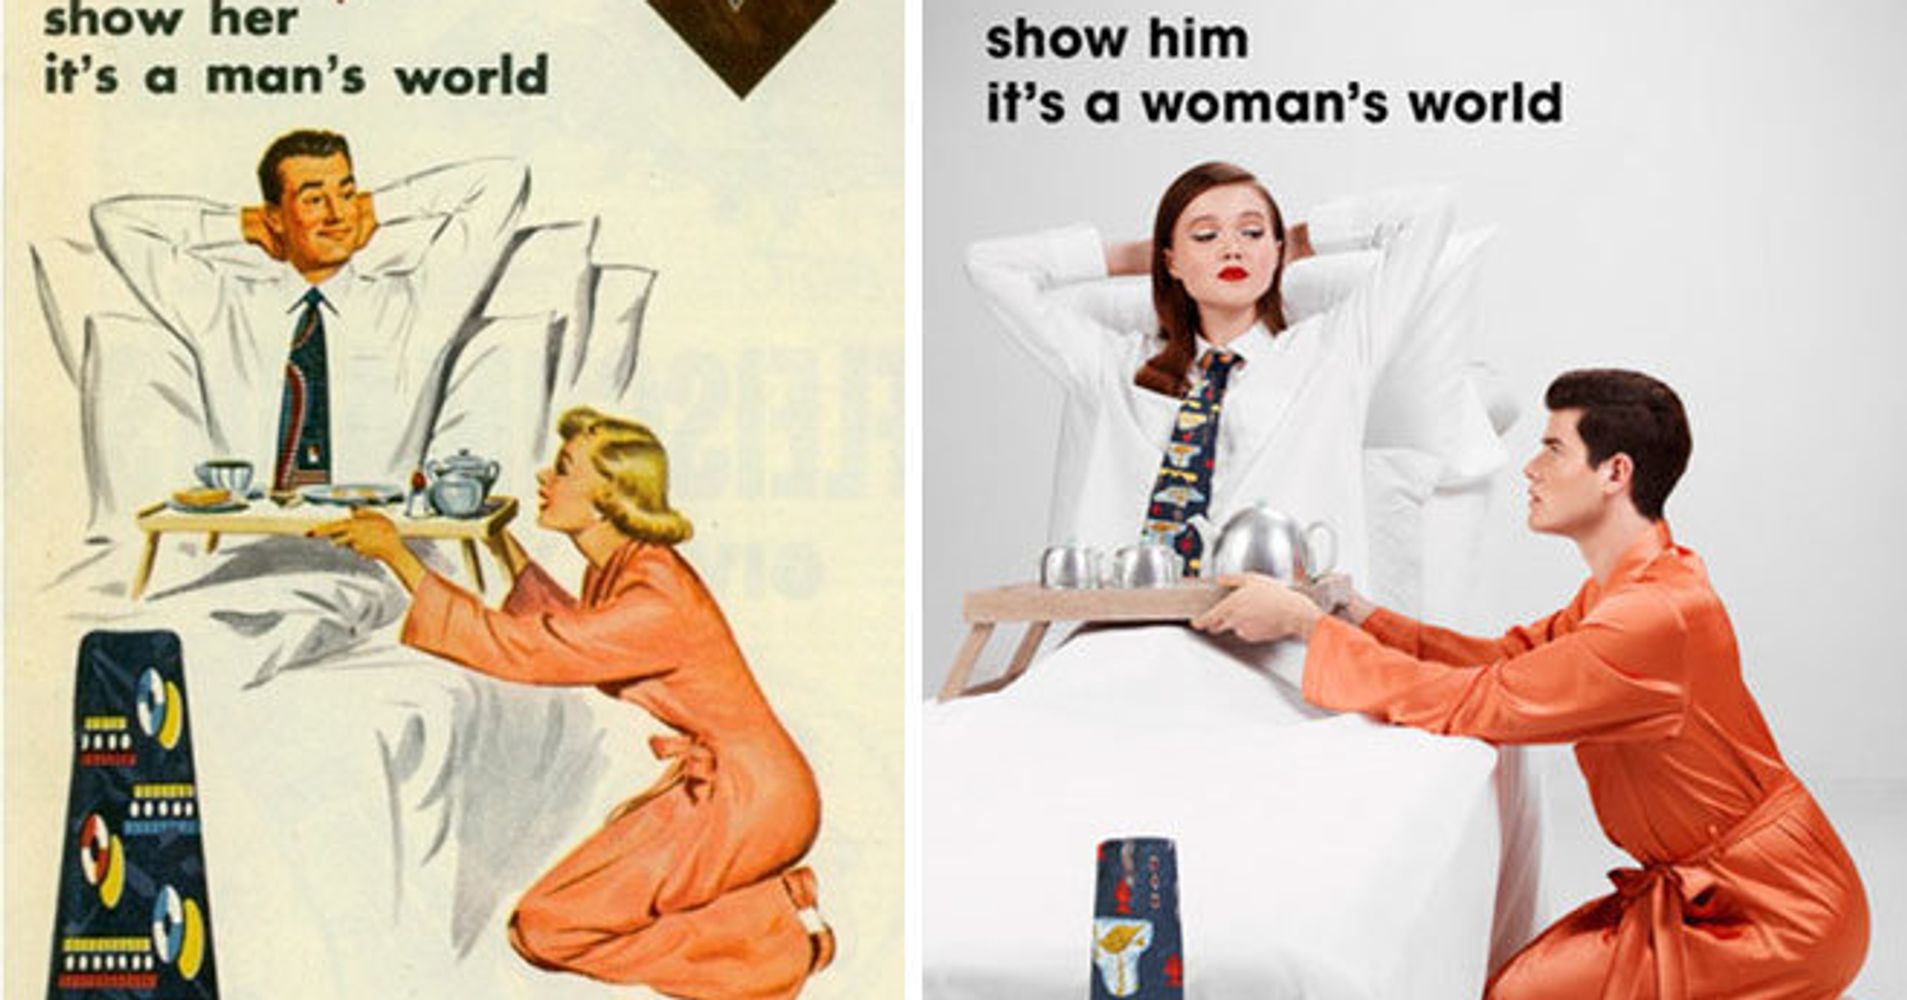 Artist Gives Vintage Ads A Feminist Makeover By Swapping Gender Roles Free Download Nude Photo